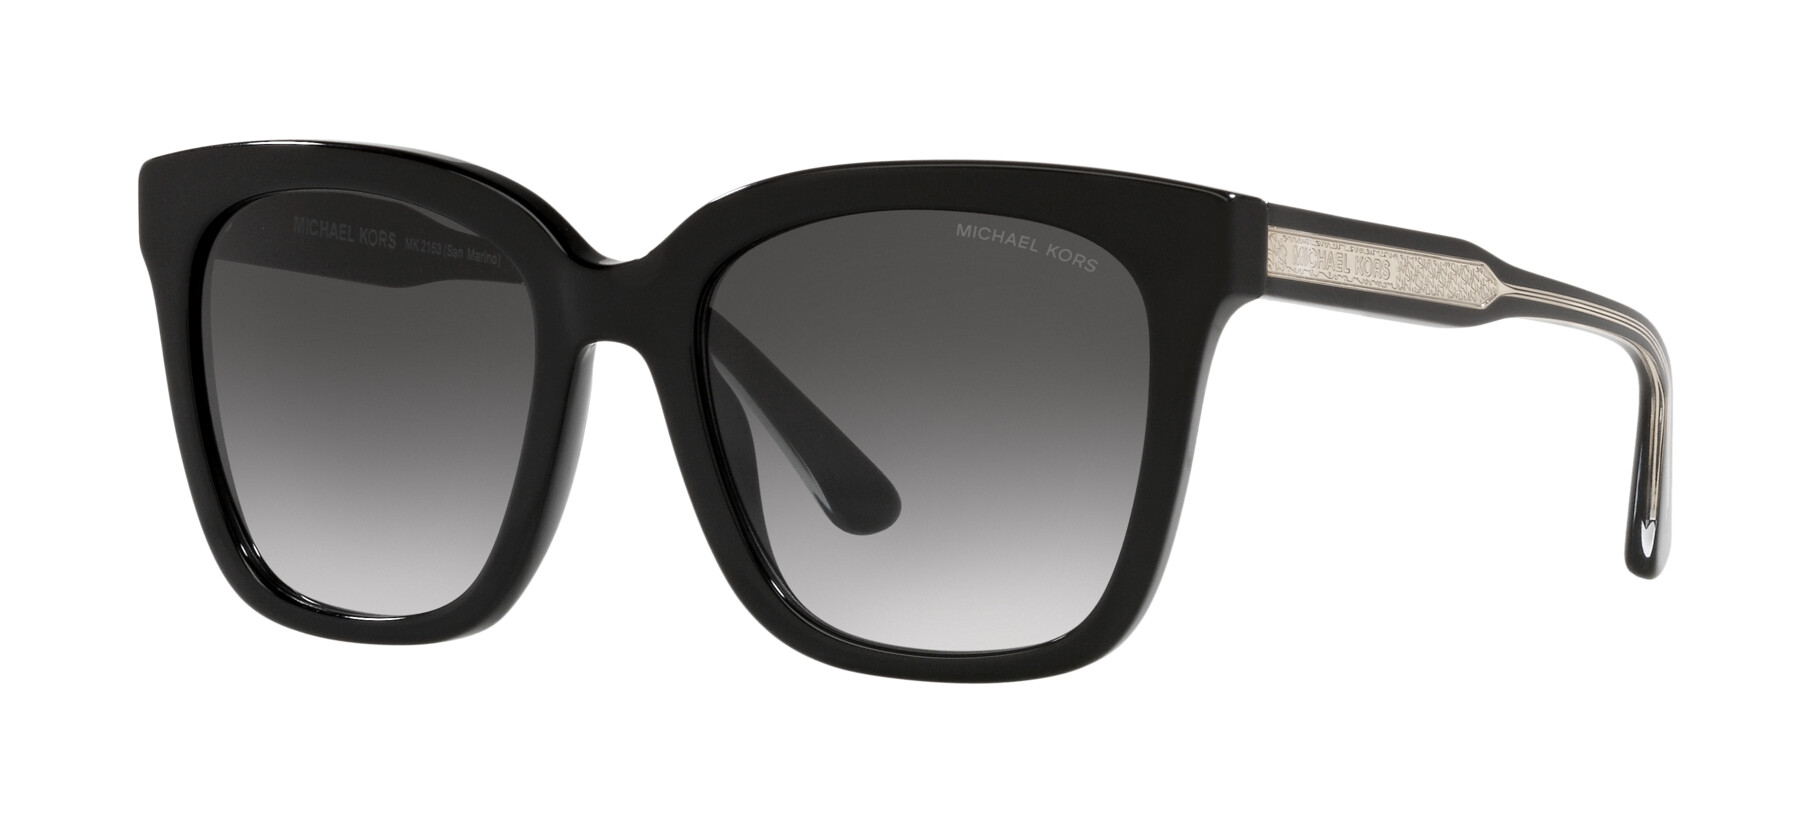 [products.image.angle_left01] Michael Kors SAN MARINO 0MK2163 30058G Sonnenbrille